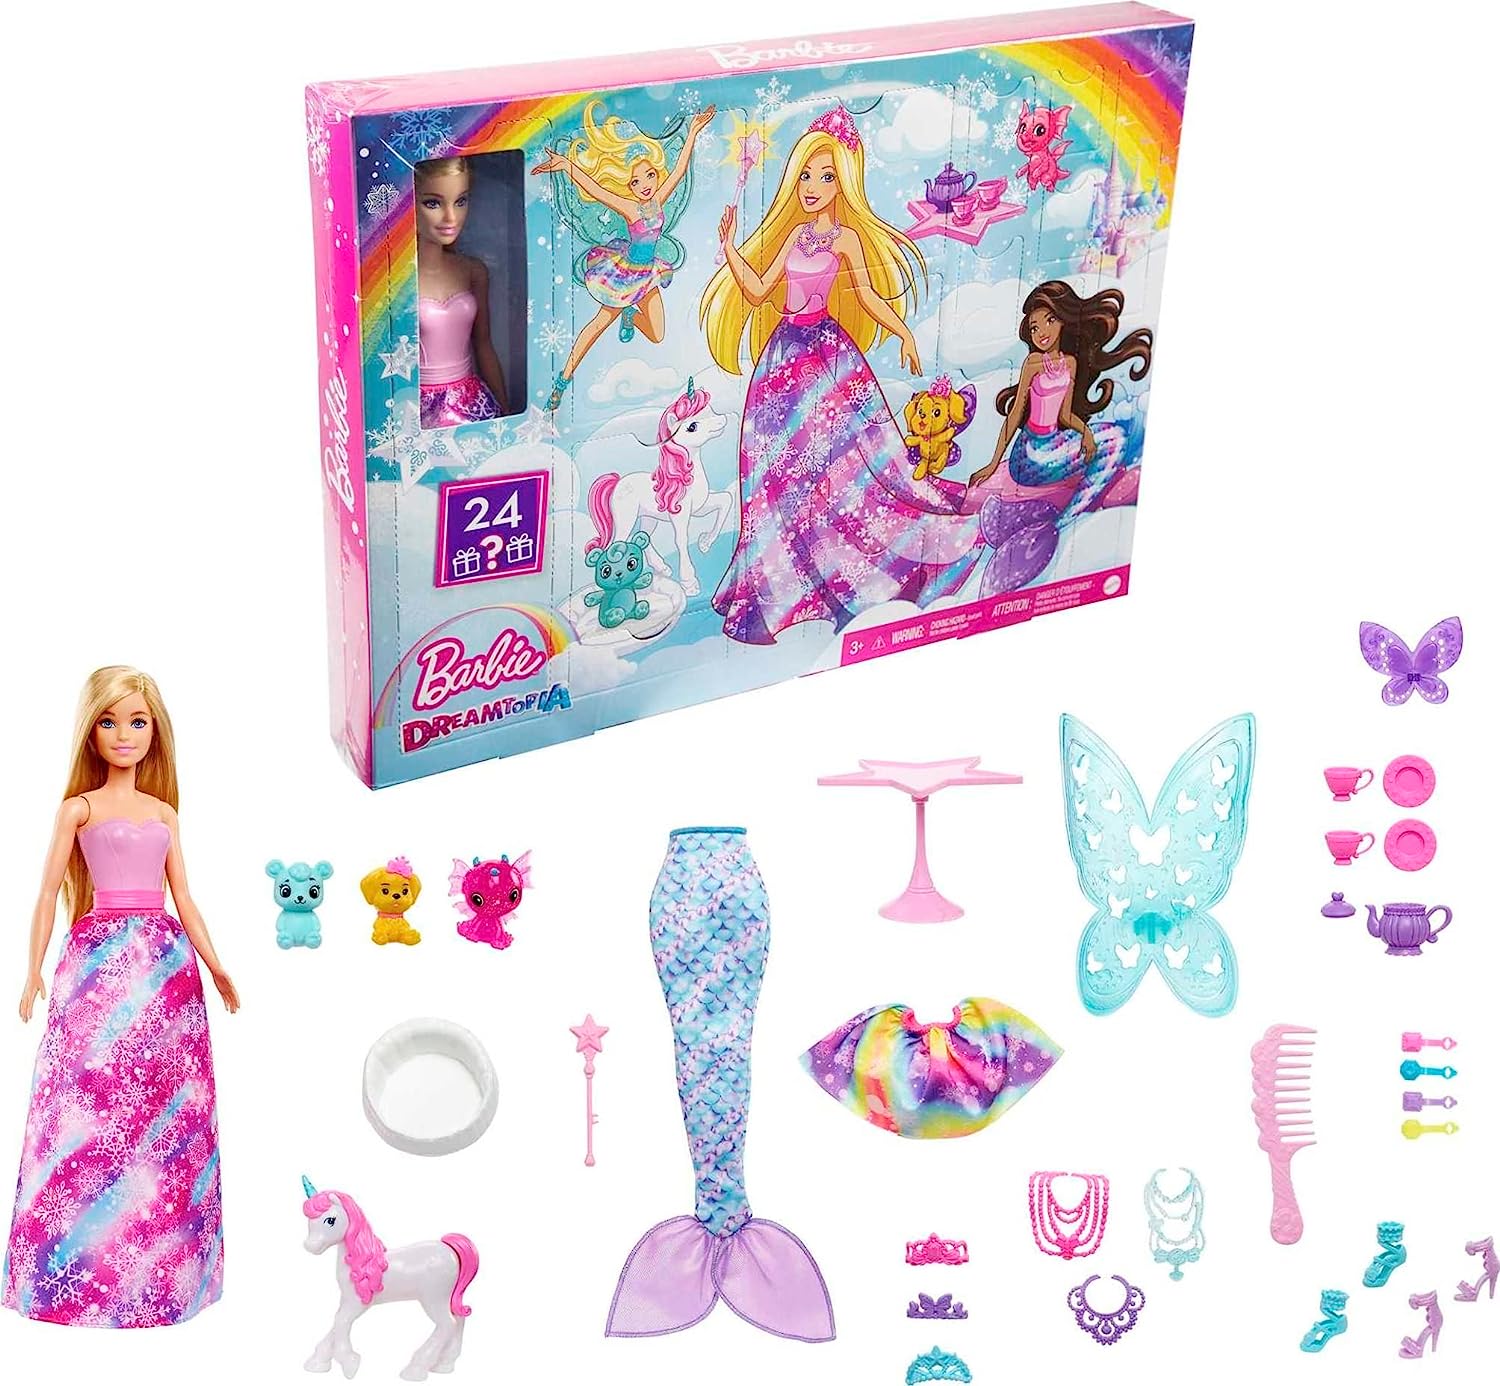 Barbie HGM66 Dreamtopia Fairytale Advent Calendar with Barbie Doll and 24 Surprises, including Fairytale Outfits, Animals and Accessories, Christmas Gift for Children from 3 Years